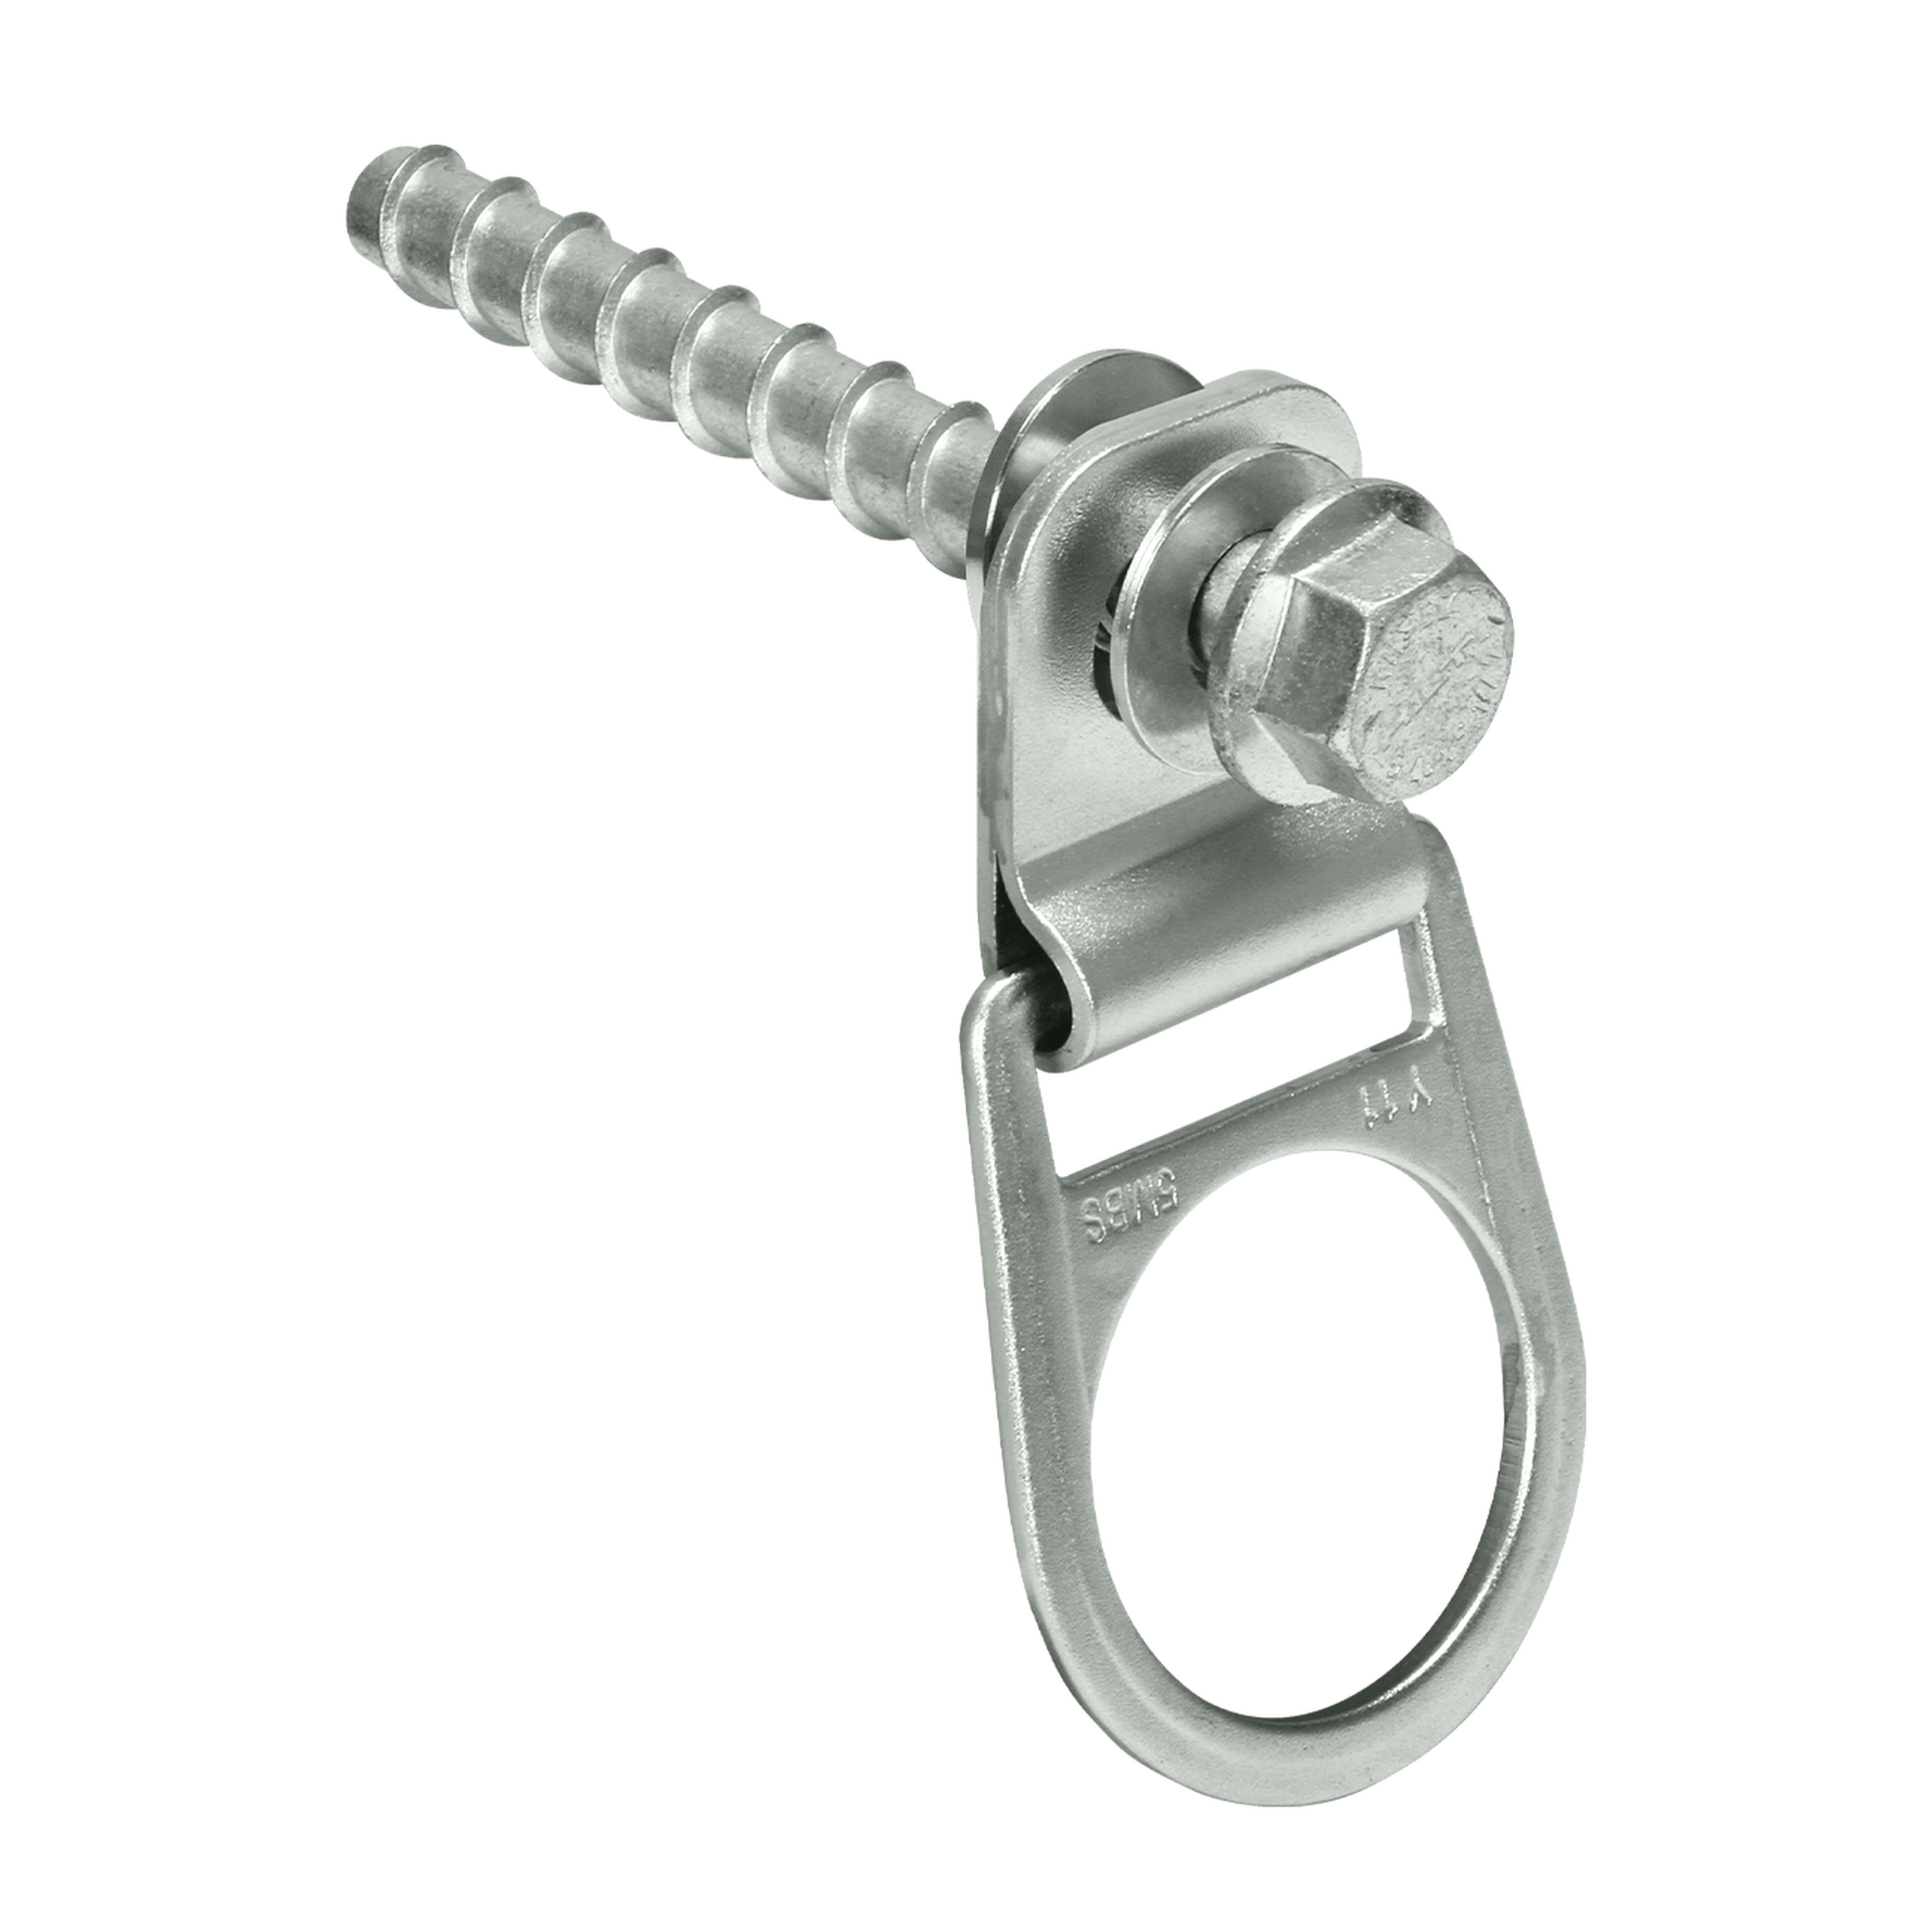 FallTech 7451A Rotating D-ring Anchor with Concrete Screw